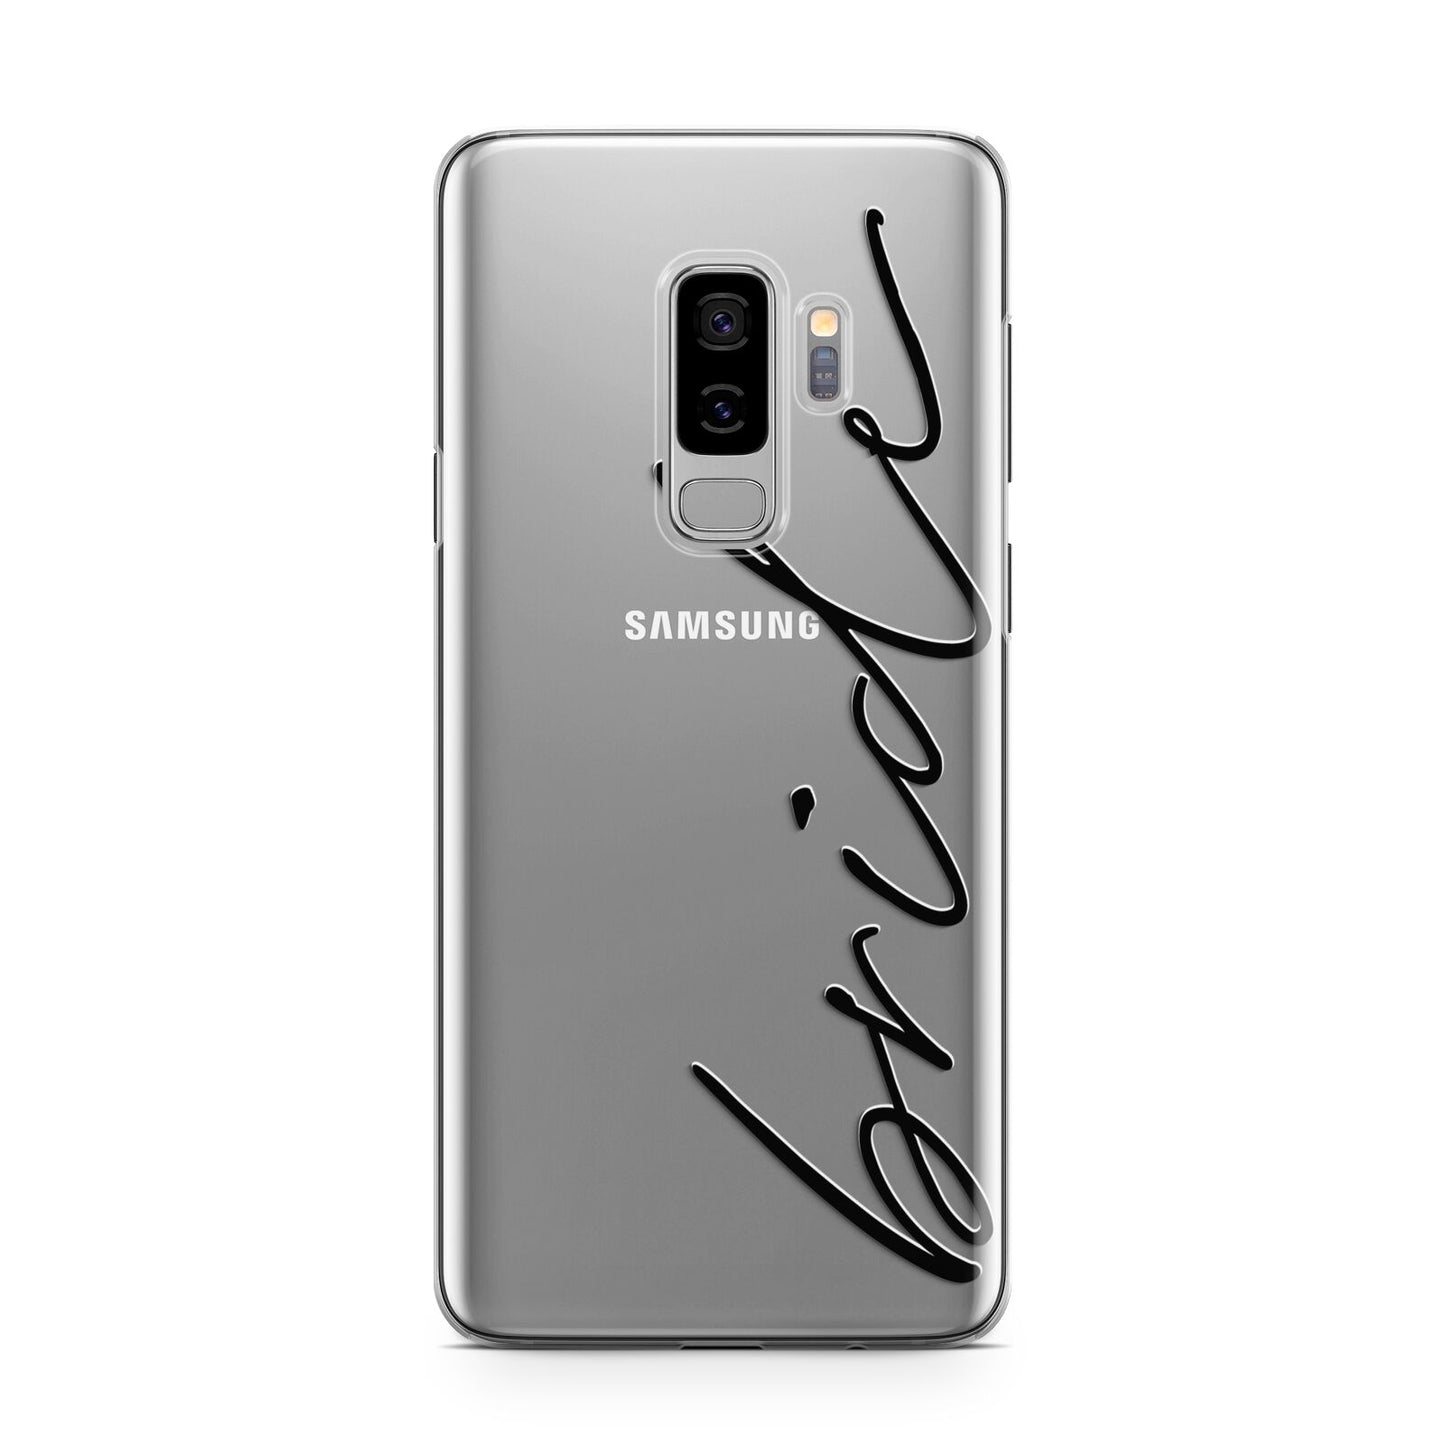 The Bride Samsung Galaxy S9 Plus Case on Silver phone